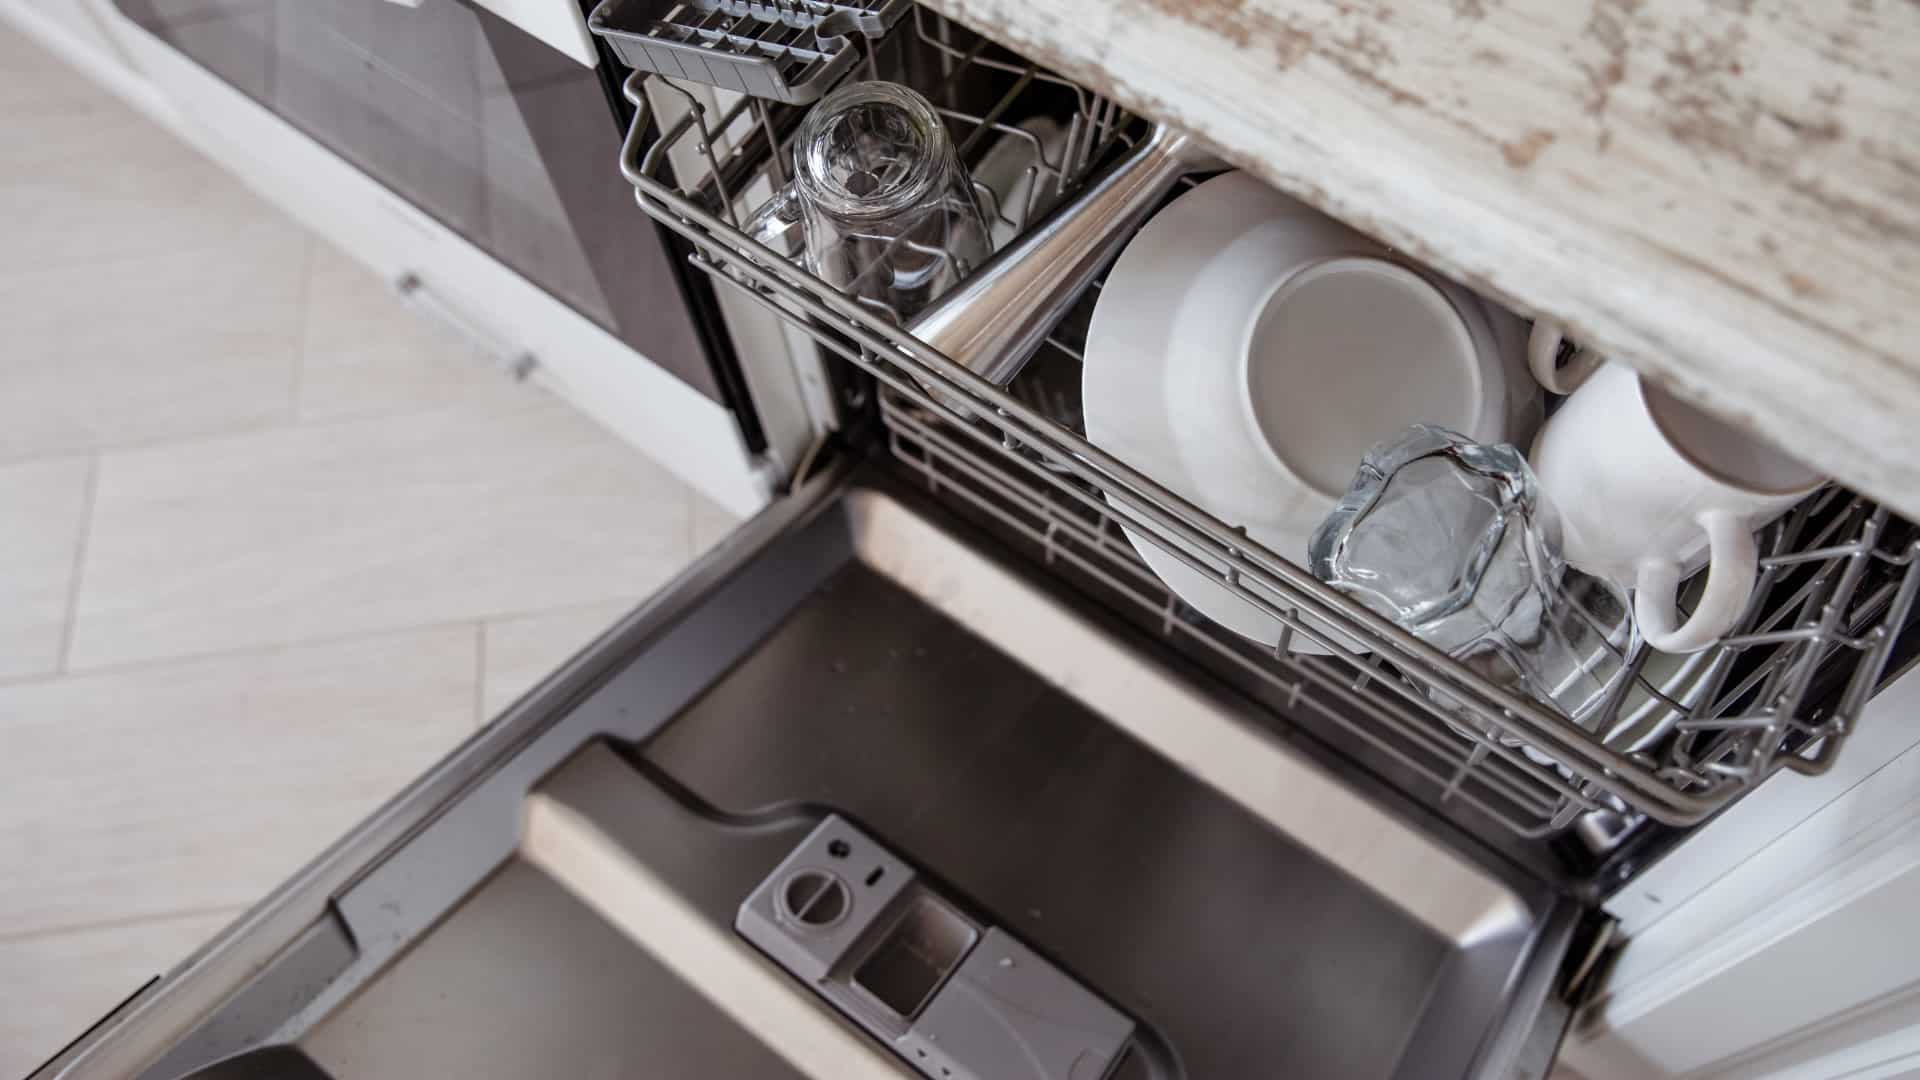 Featured image for “How to Properly Stack a Dishwasher: 5 Simple Tips”